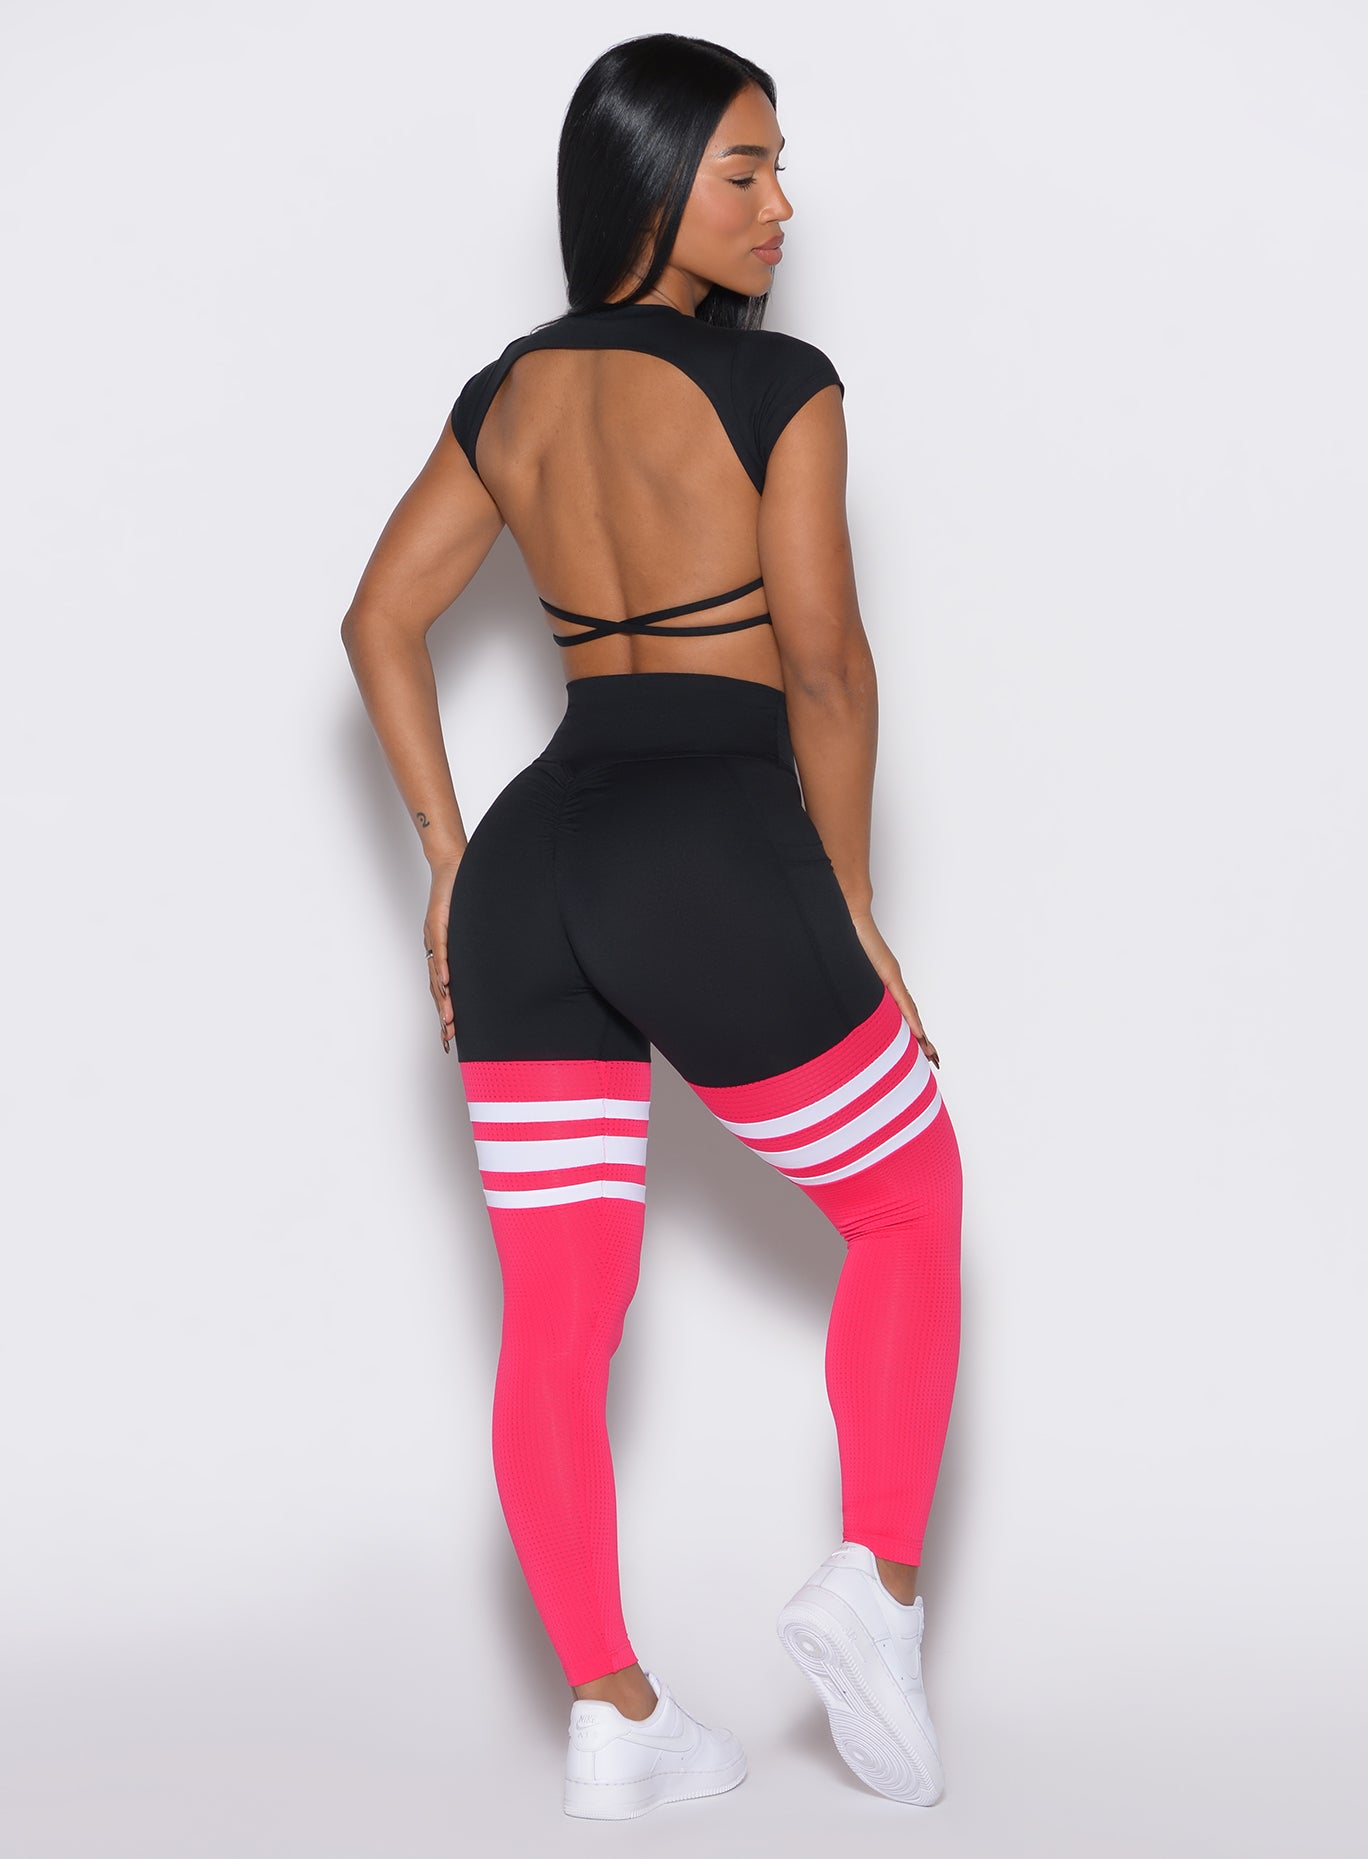 Back profile view of a model facing right wearing the Scrunch Thigh Highs in Black and Berry Color along with a black tee